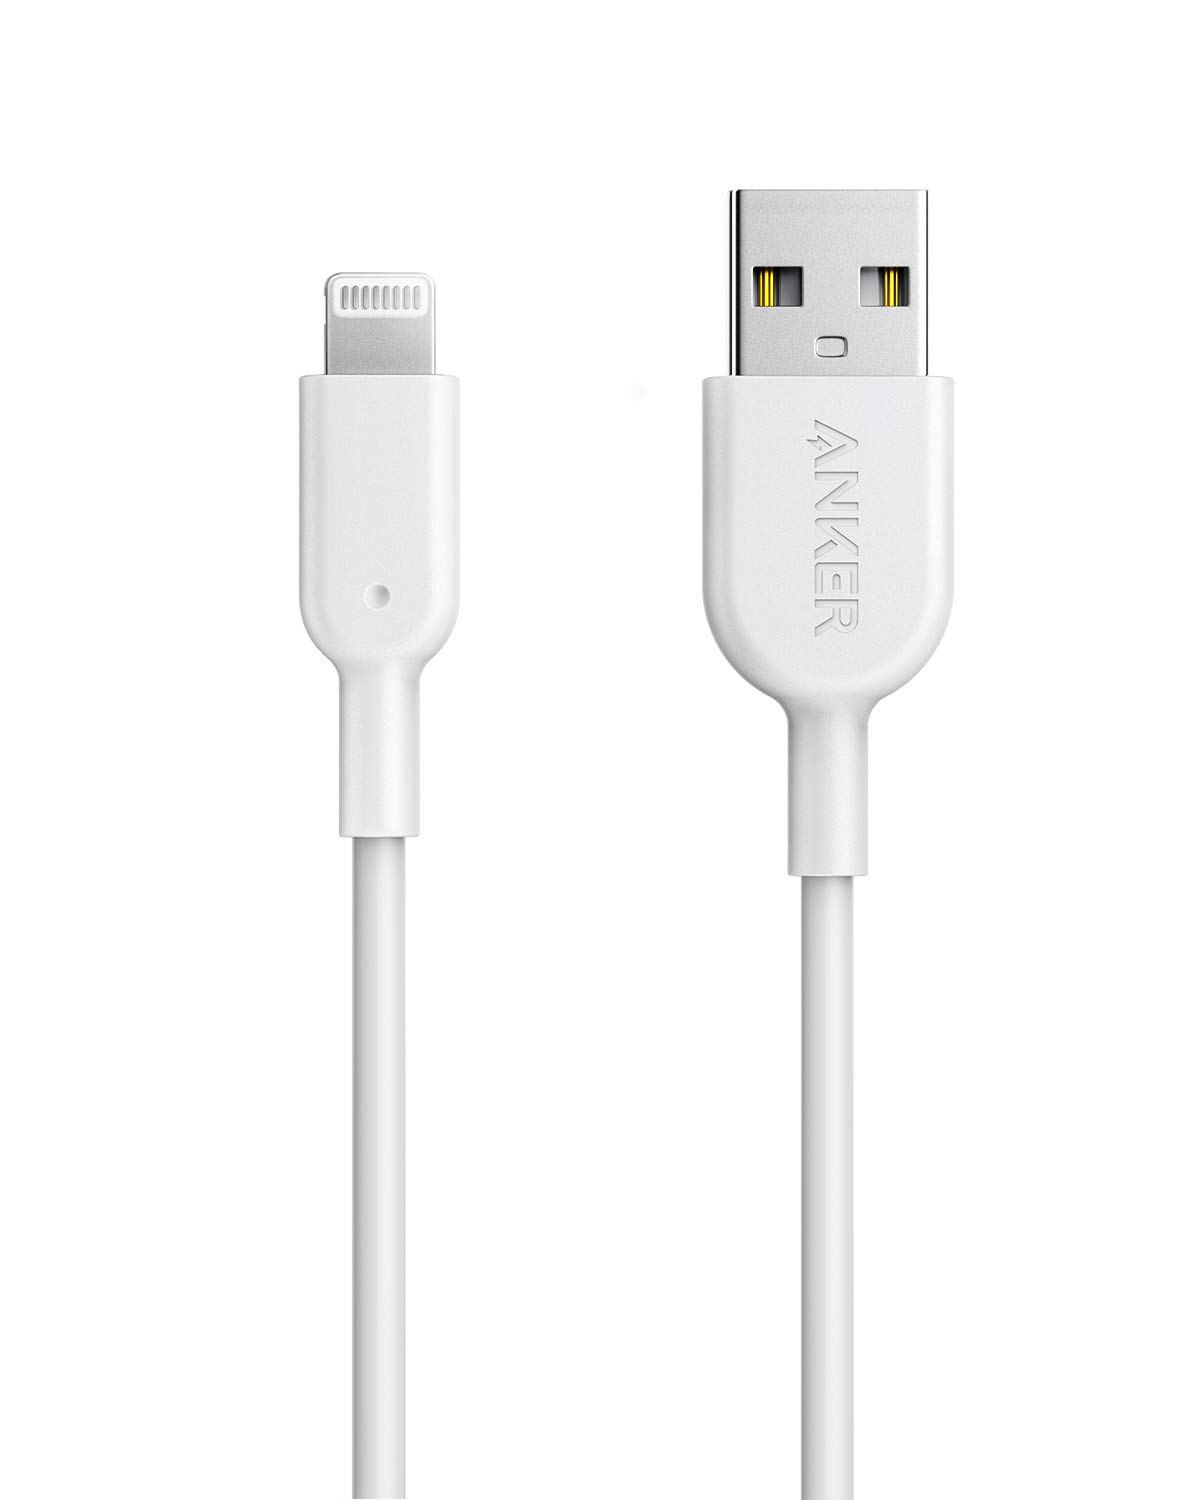 Book Cover Anker Powerline II Lightning Cable, [3ft MFi Certified] USB Charging/Sync Lightning Cord Compatible with iPhone SE 11 11 Pro 11 Pro Max Xs MAX XR X 8 7 6S 6 5, iPad and More 3ft White 1